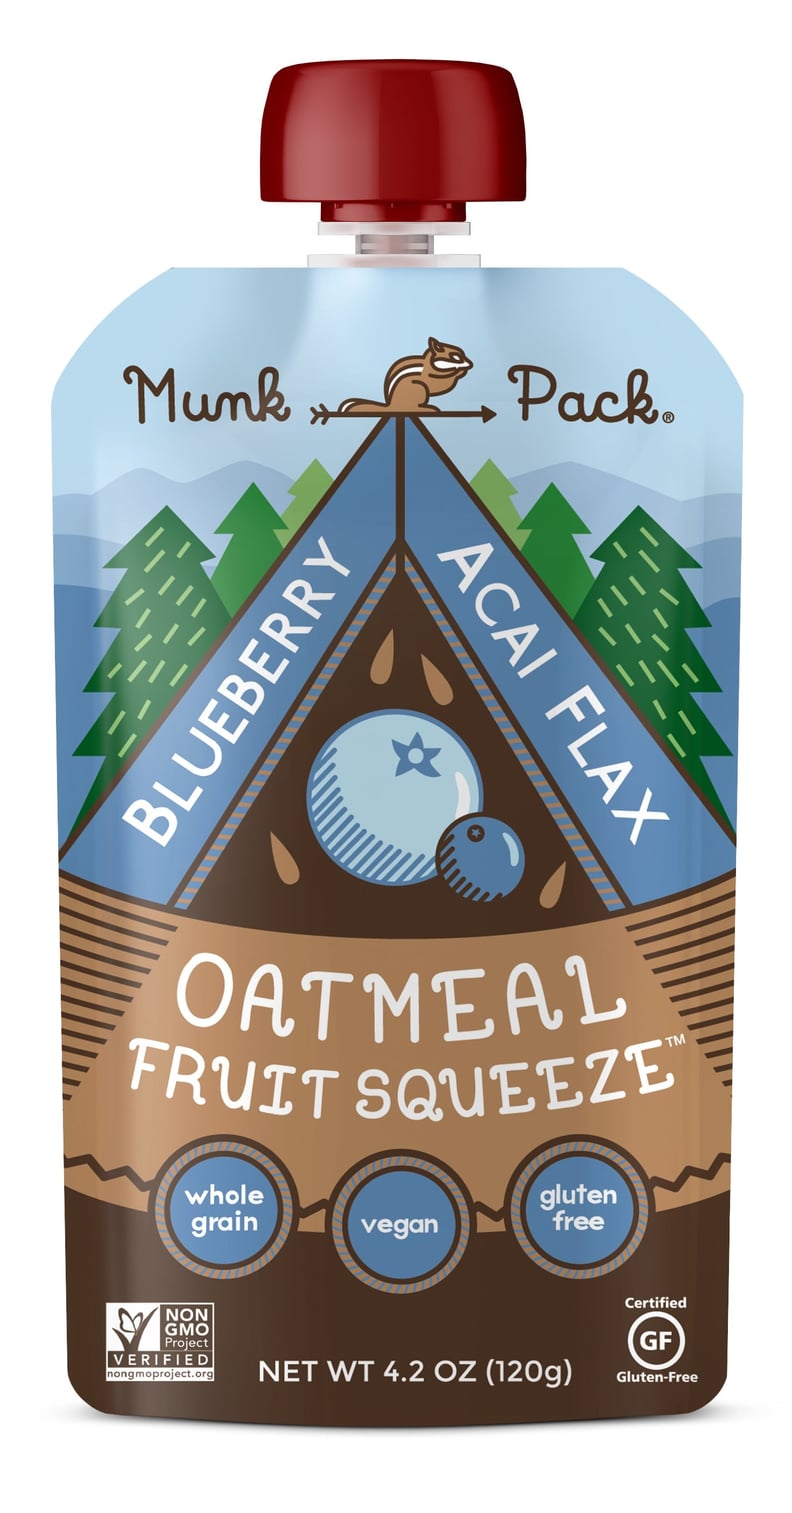 Go-Gurts and Squeeze Packs: Eat Munk Pack Oatmeal Fruit Squeezes Instead